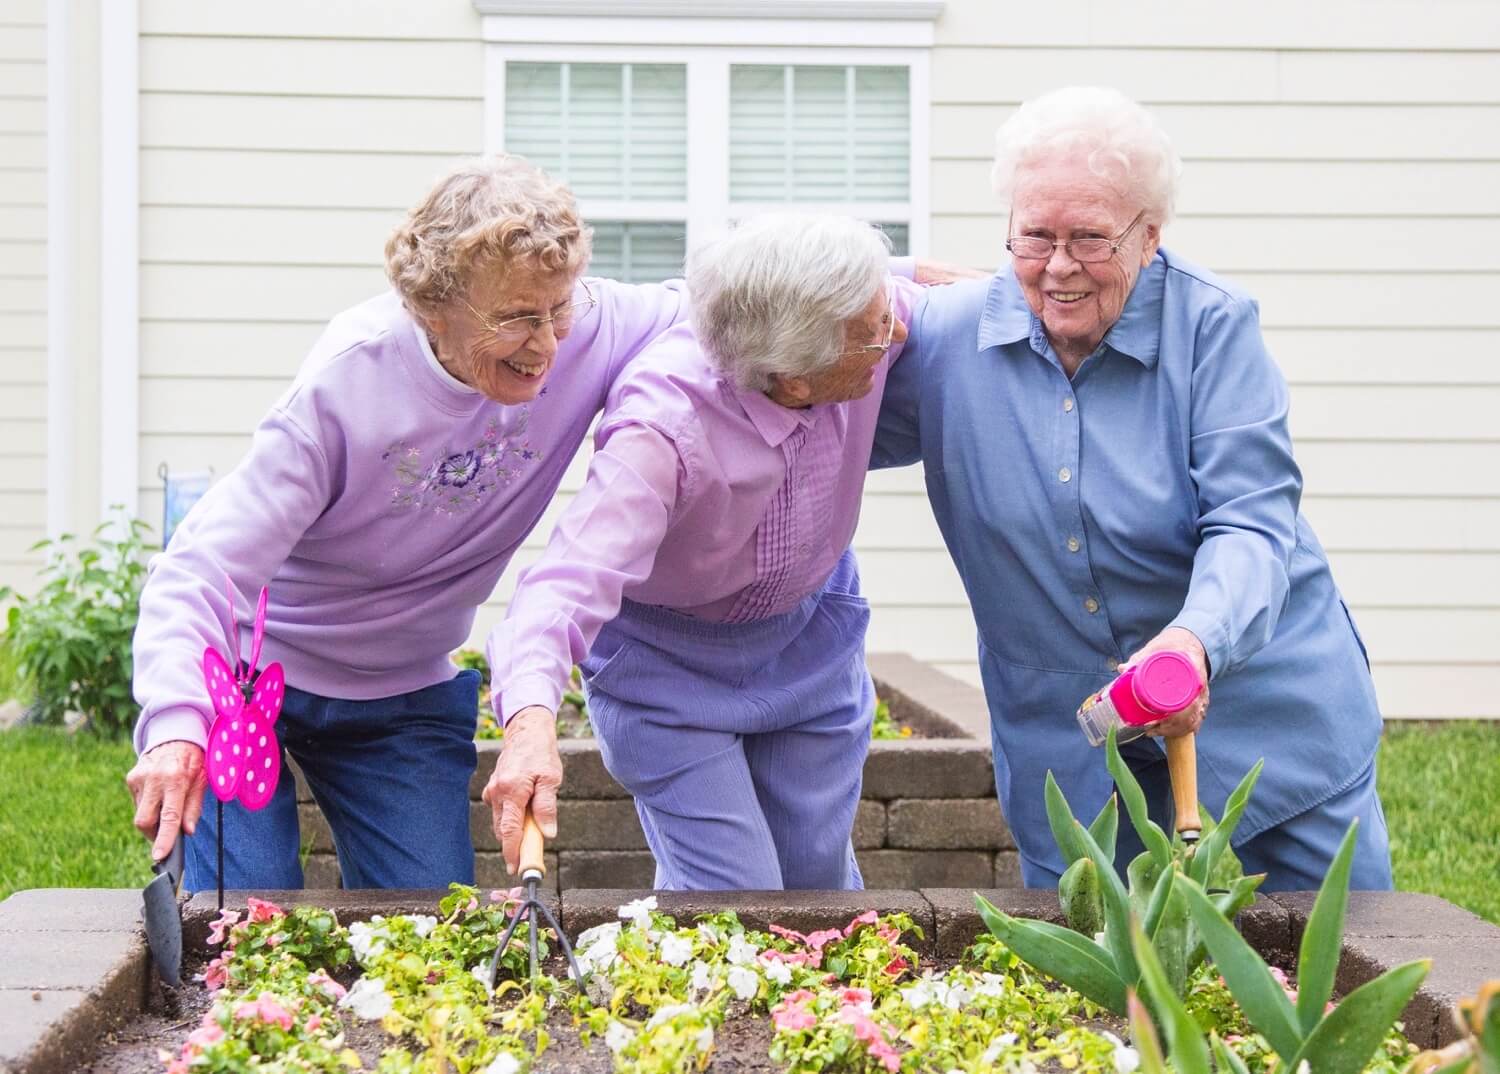 Group of residents gardening